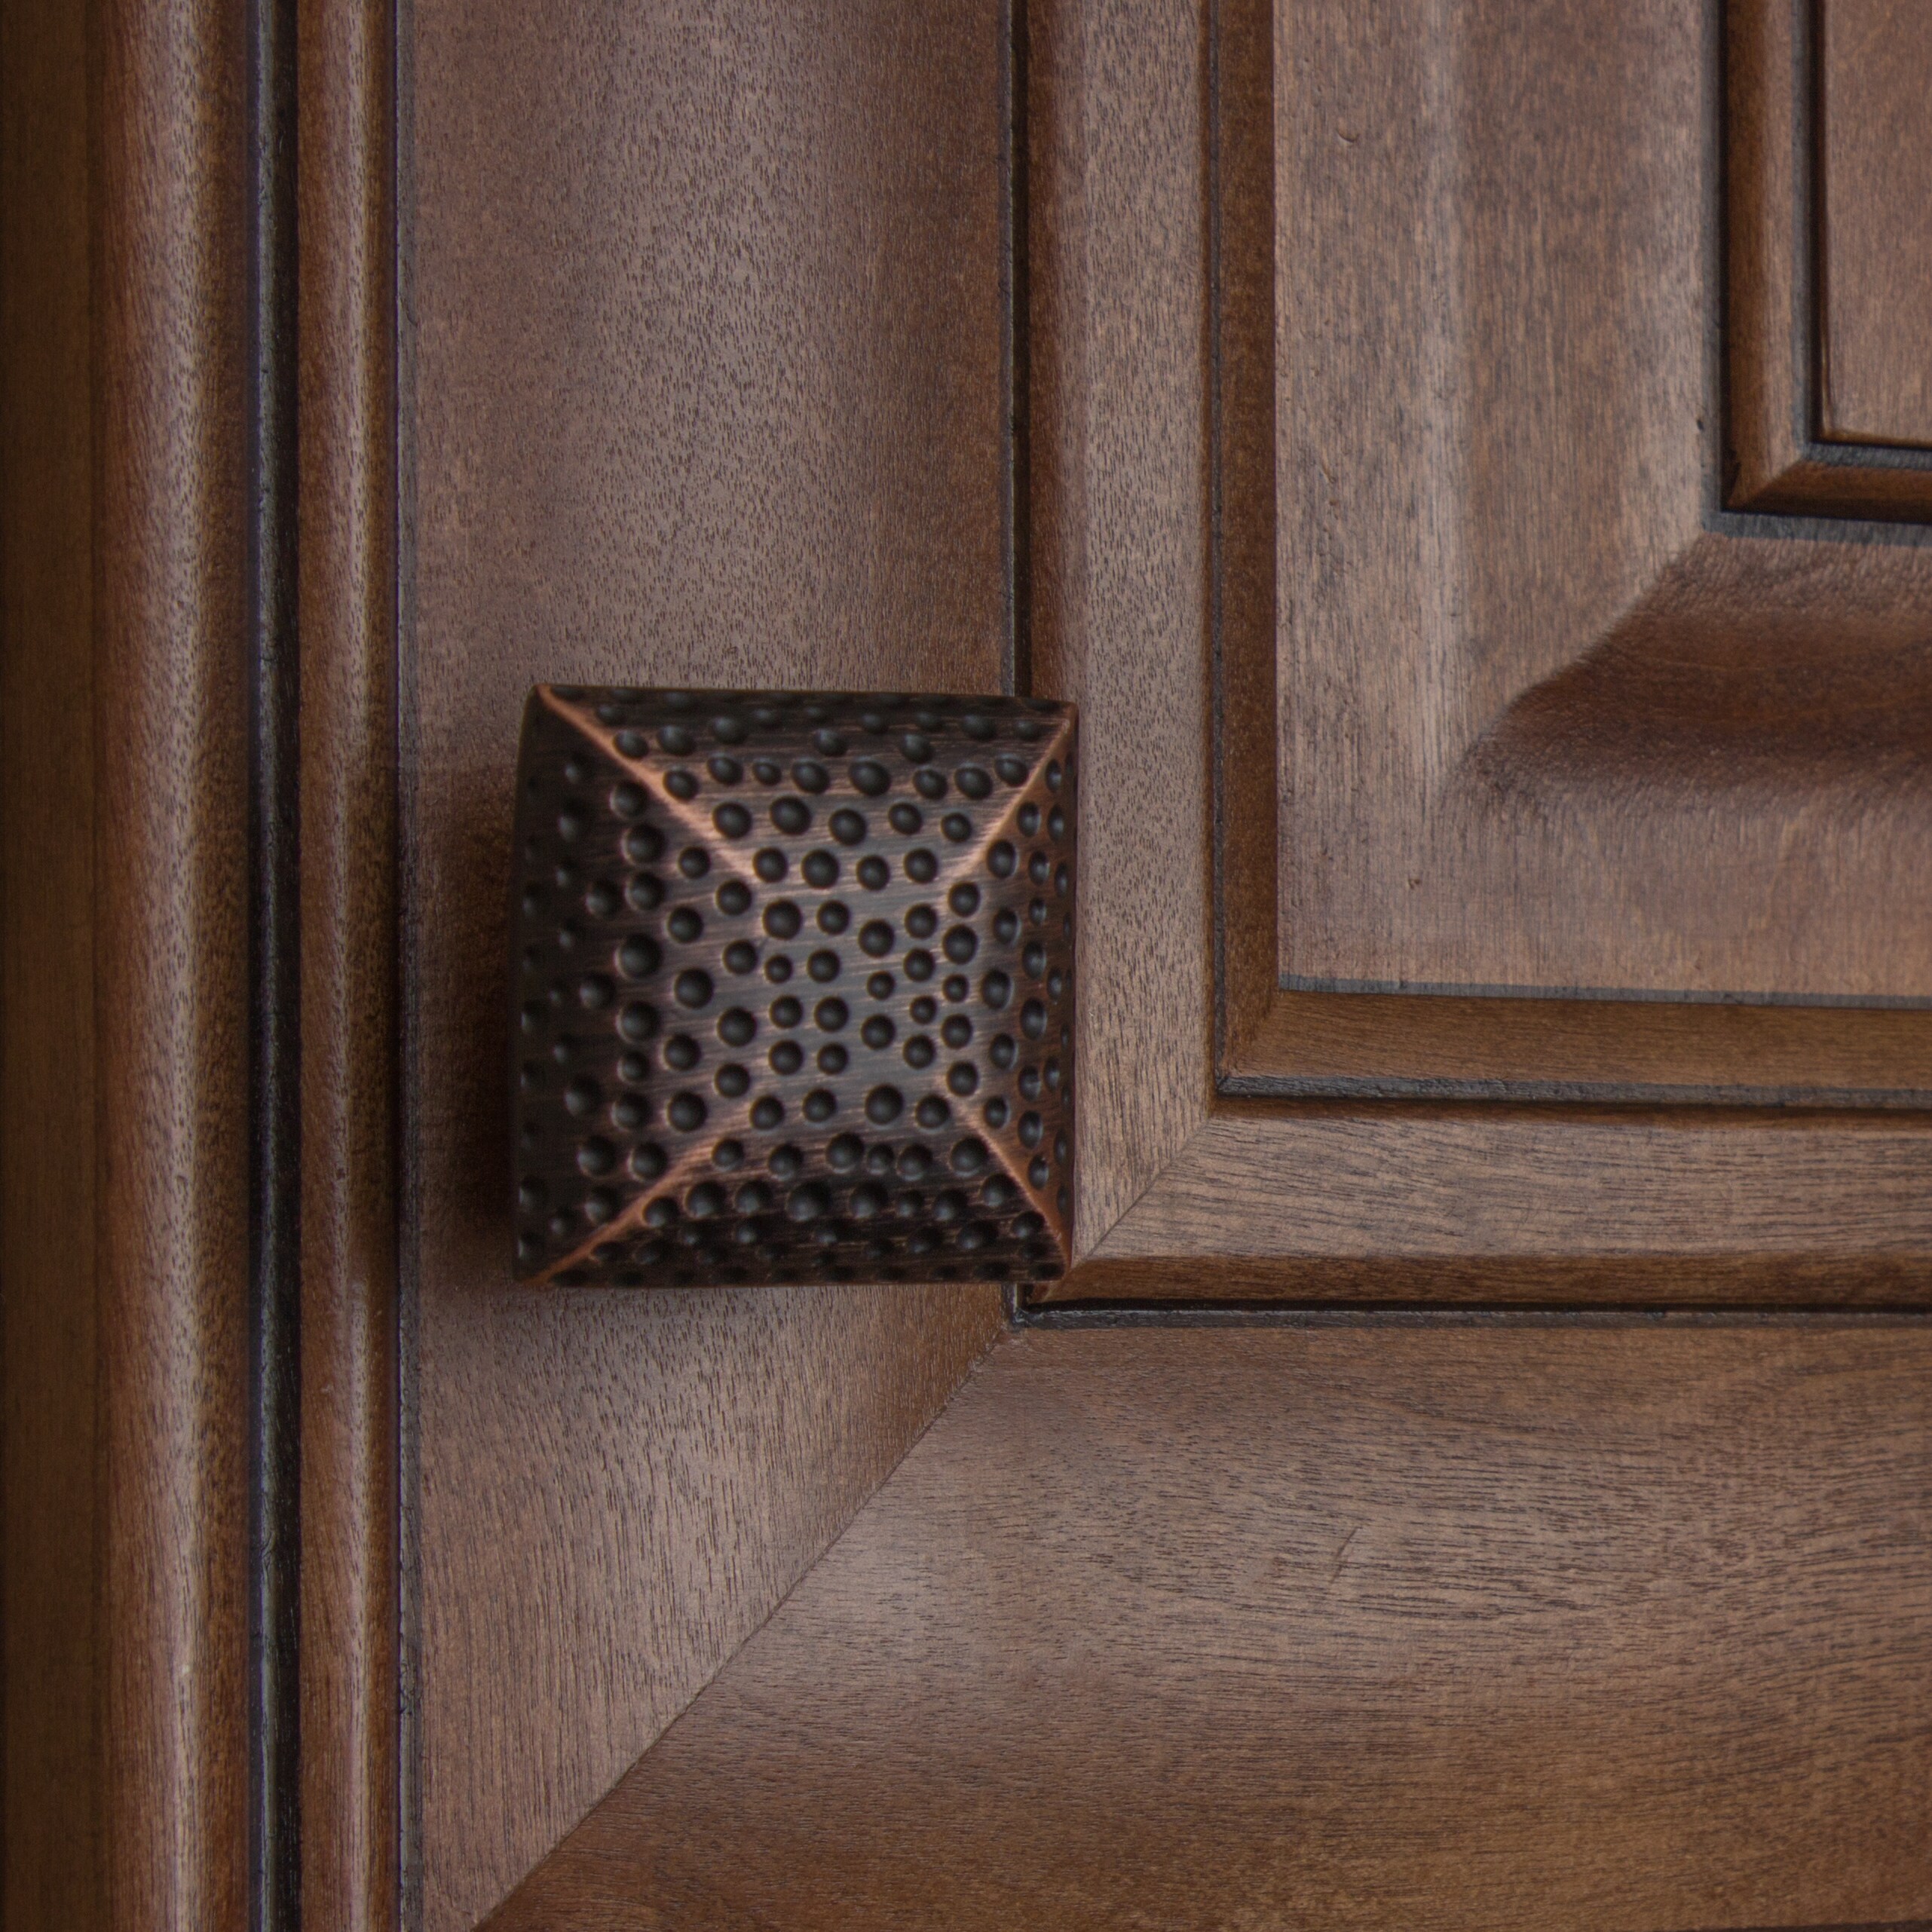 GlideRite 1-1/4 in. Dotted Hammered Transitional Square Cabinet Knobs, Oil Rubbed Bronze, Pack of 10 - image 5 of 5